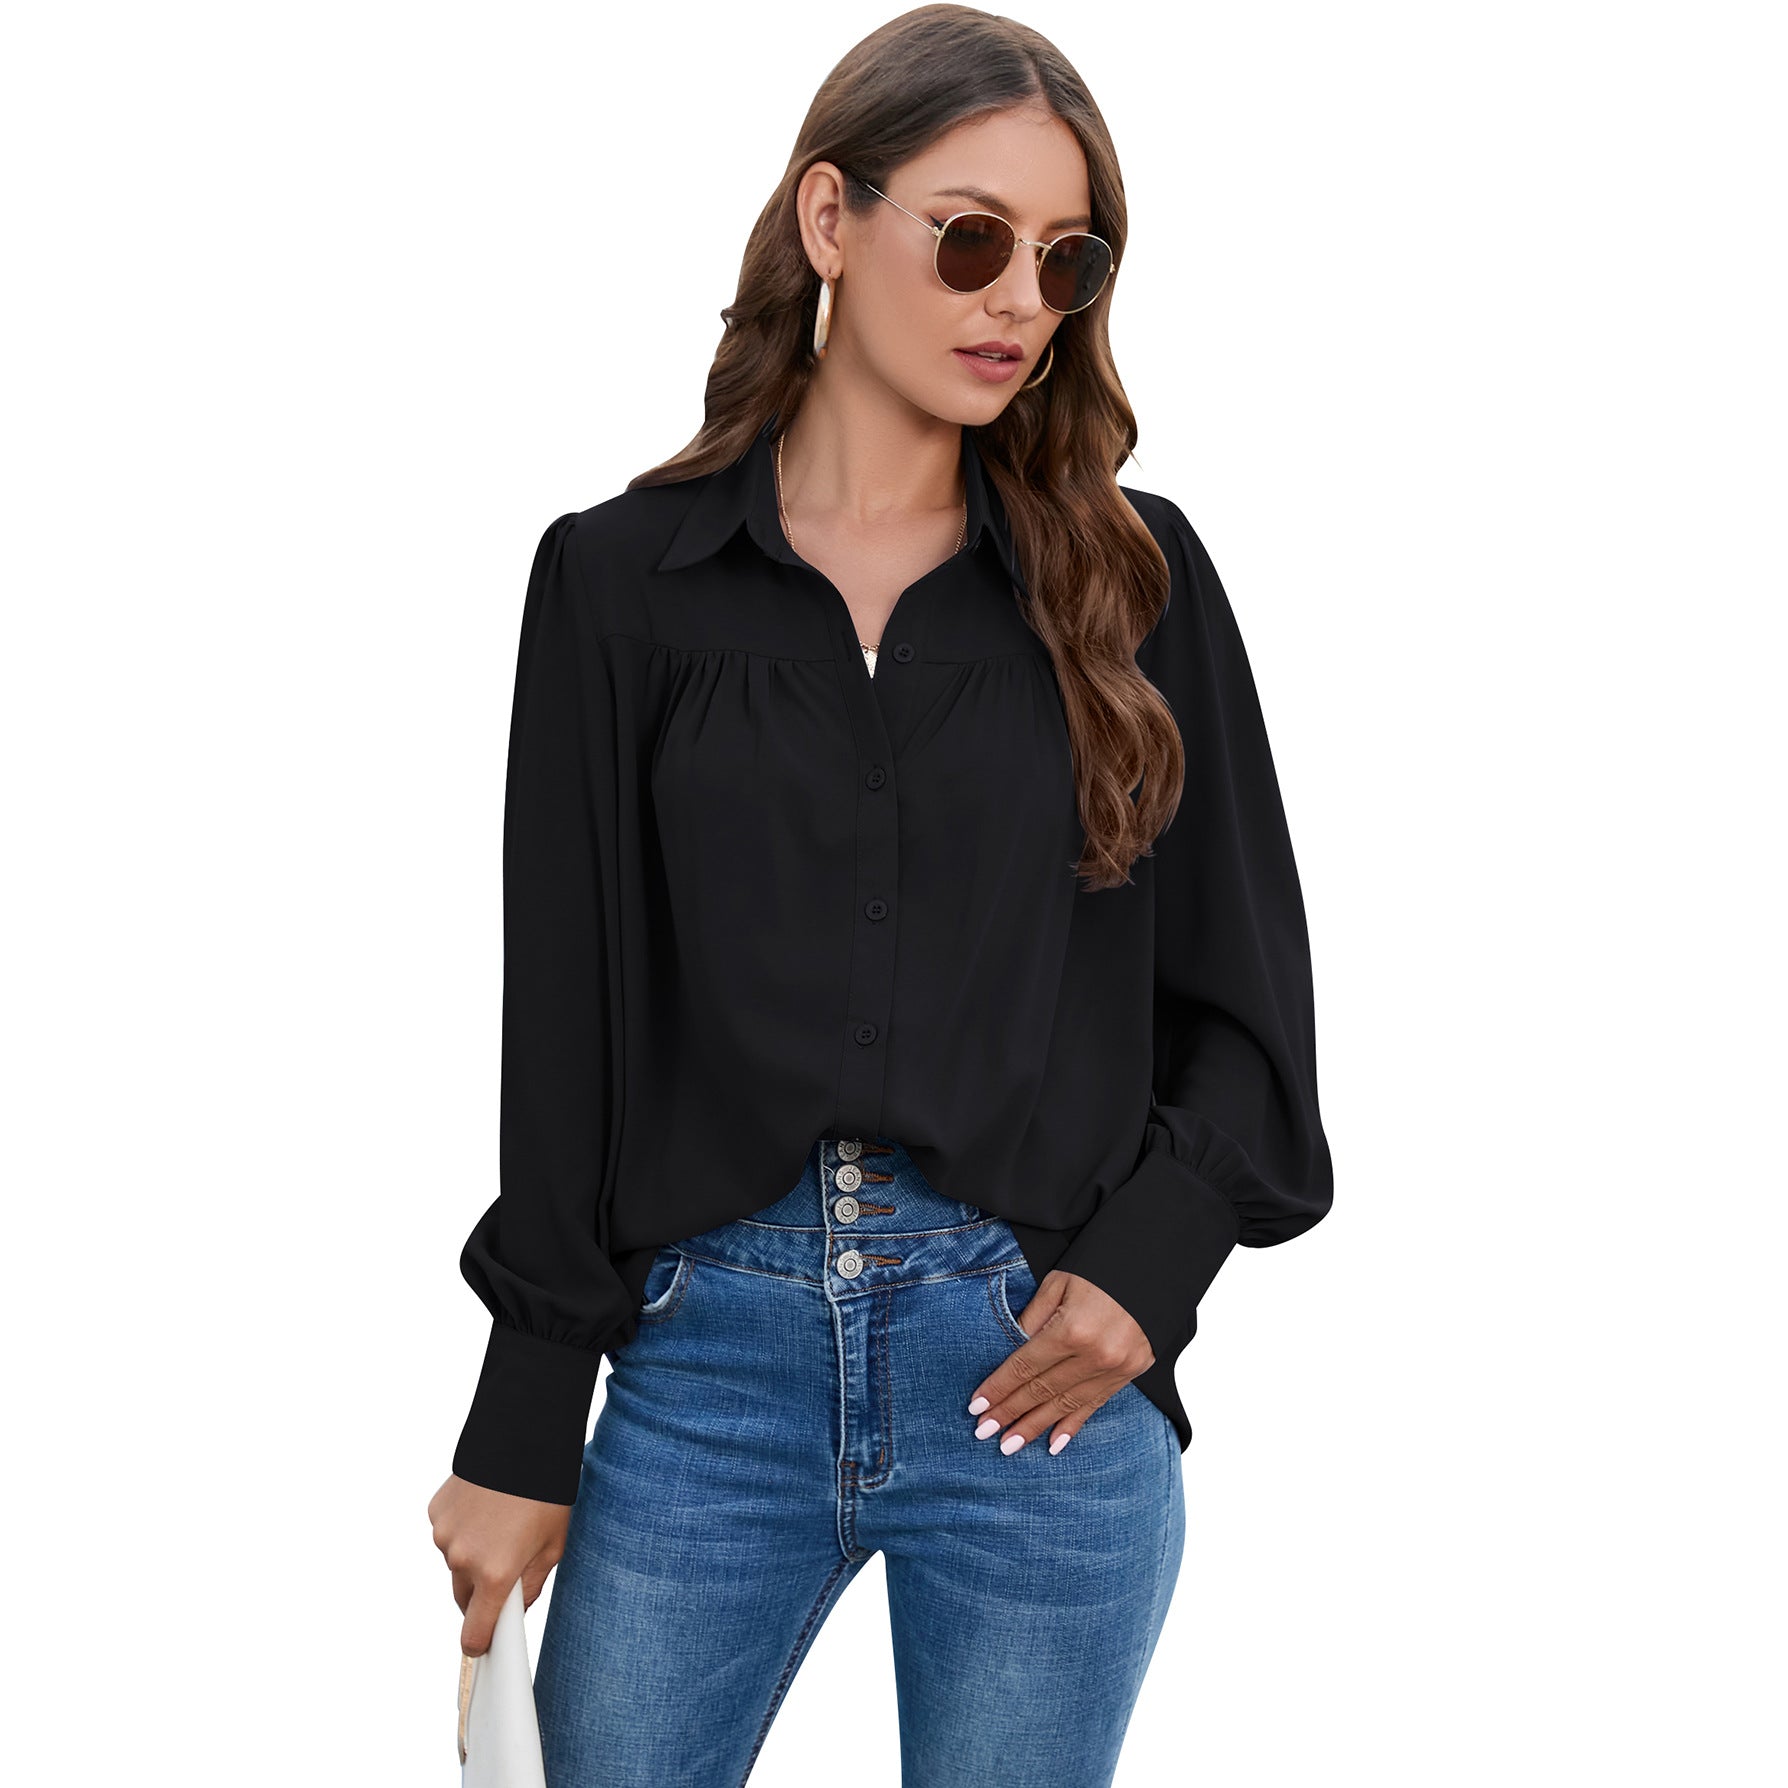 Women's Fashion Charming Classy Pleated Long-sleeved Shirts Blouses